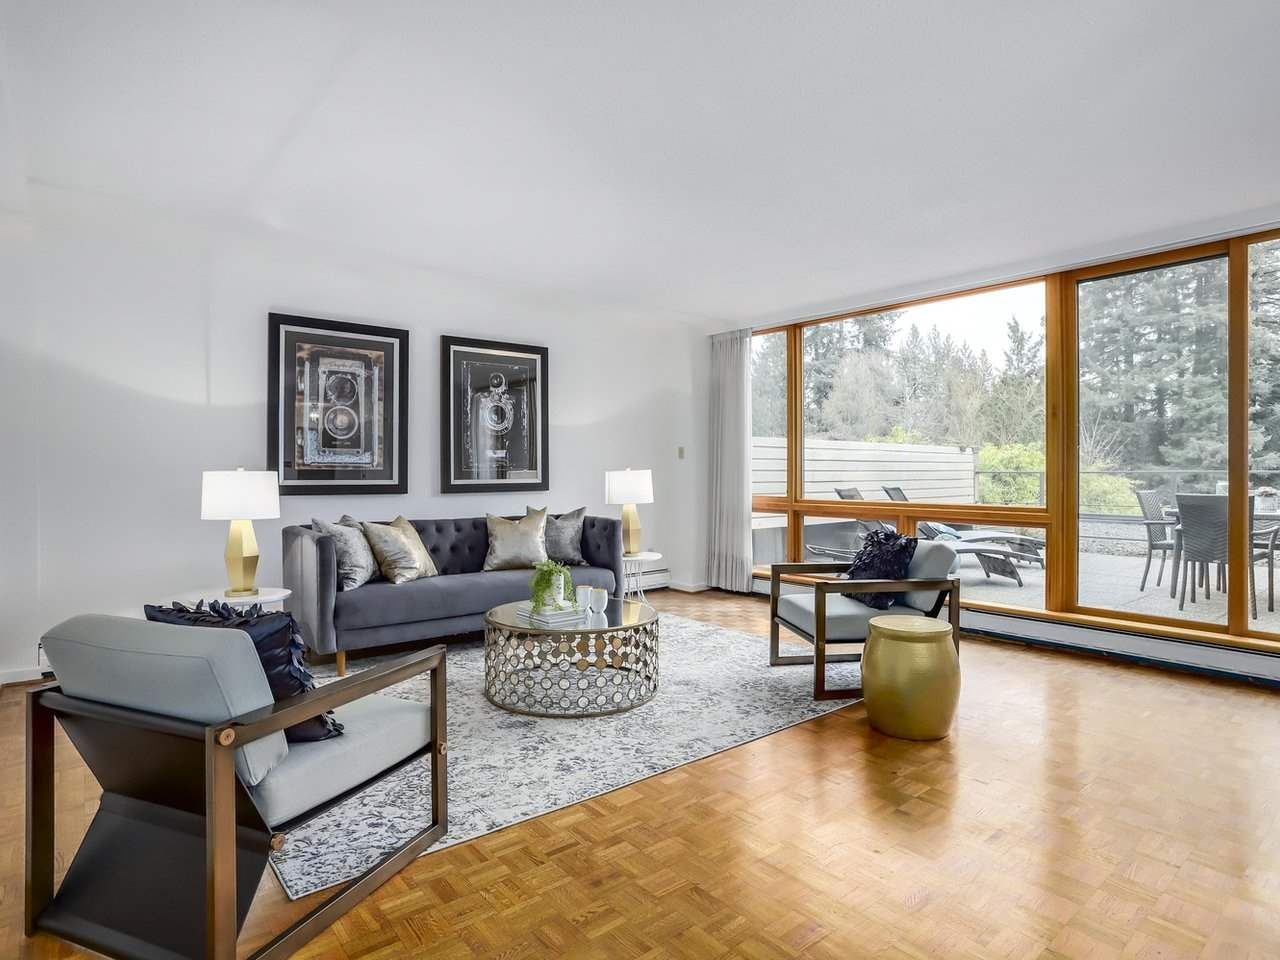 Main Photo: 205 4900 CARTIER STREET in : Shaughnessy Condo for sale : MLS®# R2336663